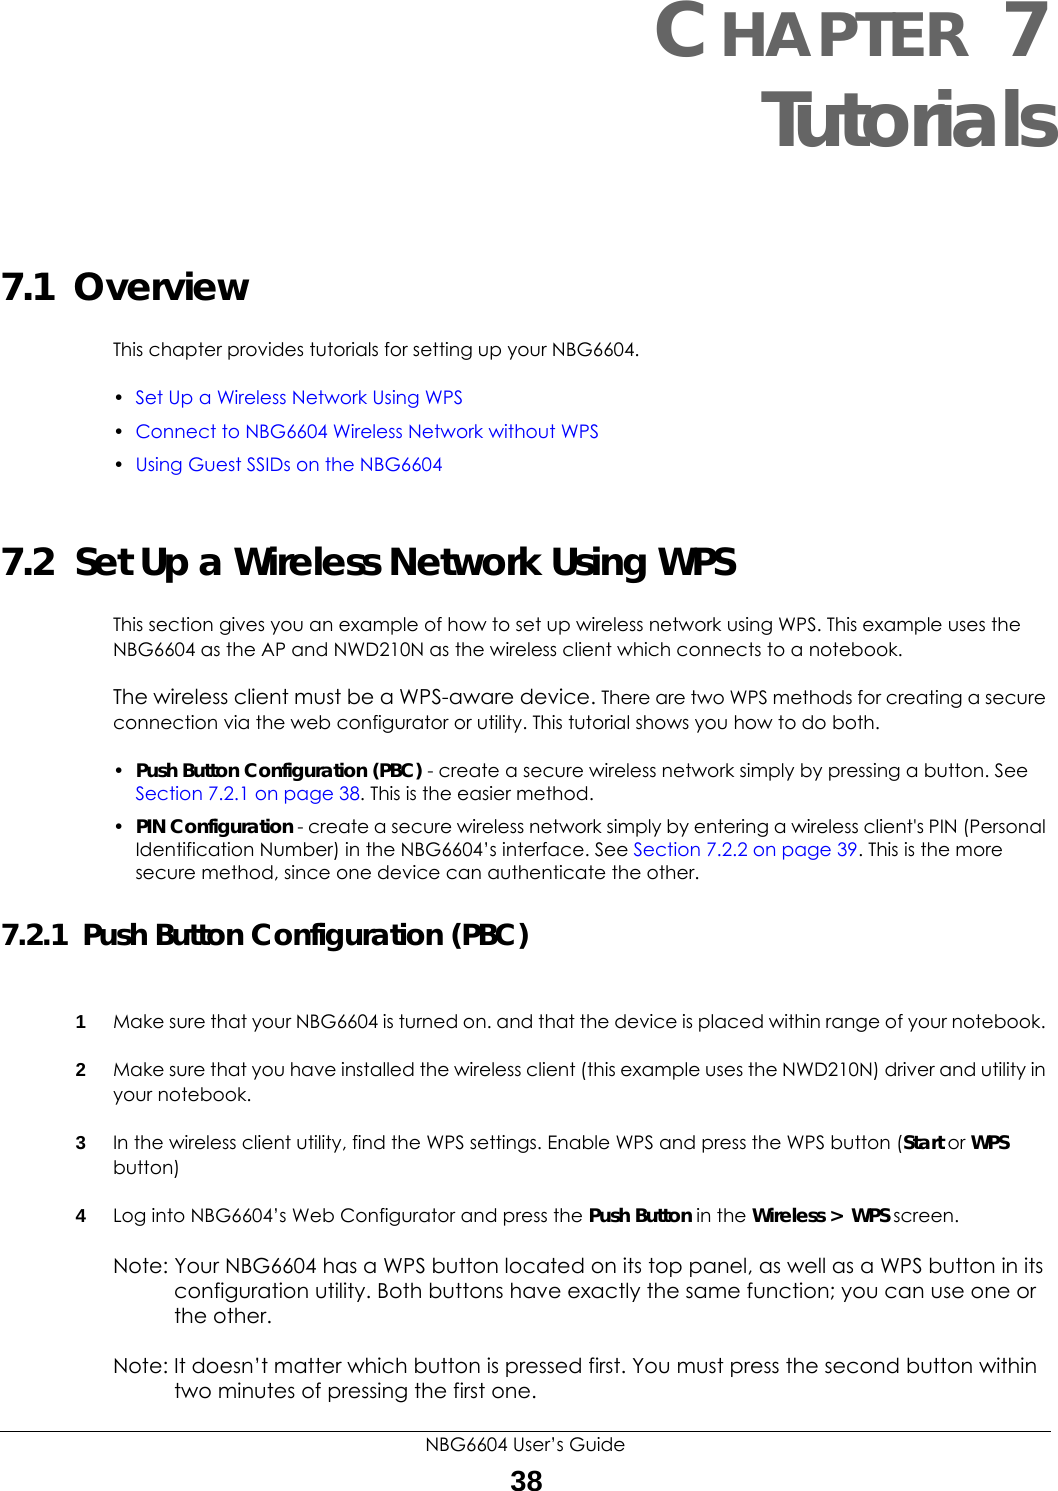 NBG6604 User’s Guide38CHAPTER 7 Tutorials7.1  OverviewThis chapter provides tutorials for setting up your NBG6604.•Set Up a Wireless Network Using WPS•Connect to NBG6604 Wireless Network without WPS•Using Guest SSIDs on the NBG66047.2  Set Up a Wireless Network Using WPSThis section gives you an example of how to set up wireless network using WPS. This example uses the NBG6604 as the AP and NWD210N as the wireless client which connects to a notebook. The wireless client must be a WPS-aware device. There are two WPS methods for creating a secure connection via the web configurator or utility. This tutorial shows you how to do both.•Push Button Configuration (PBC) - create a secure wireless network simply by pressing a button. See Section 7.2.1 on page 38. This is the easier method.•PIN Configuration - create a secure wireless network simply by entering a wireless client&apos;s PIN (Personal Identification Number) in the NBG6604’s interface. See Section 7.2.2 on page 39. This is the more secure method, since one device can authenticate the other.7.2.1  Push Button Configuration (PBC)1Make sure that your NBG6604 is turned on. and that the device is placed within range of your notebook. 2Make sure that you have installed the wireless client (this example uses the NWD210N) driver and utility in your notebook.3In the wireless client utility, find the WPS settings. Enable WPS and press the WPS button (Start or WPS button)4Log into NBG6604’s Web Configurator and press the Push Button in the Wireless &gt;  WPS screen. Note: Your NBG6604 has a WPS button located on its top panel, as well as a WPS button in its configuration utility. Both buttons have exactly the same function; you can use one or the other.Note: It doesn’t matter which button is pressed first. You must press the second button within two minutes of pressing the first one. 